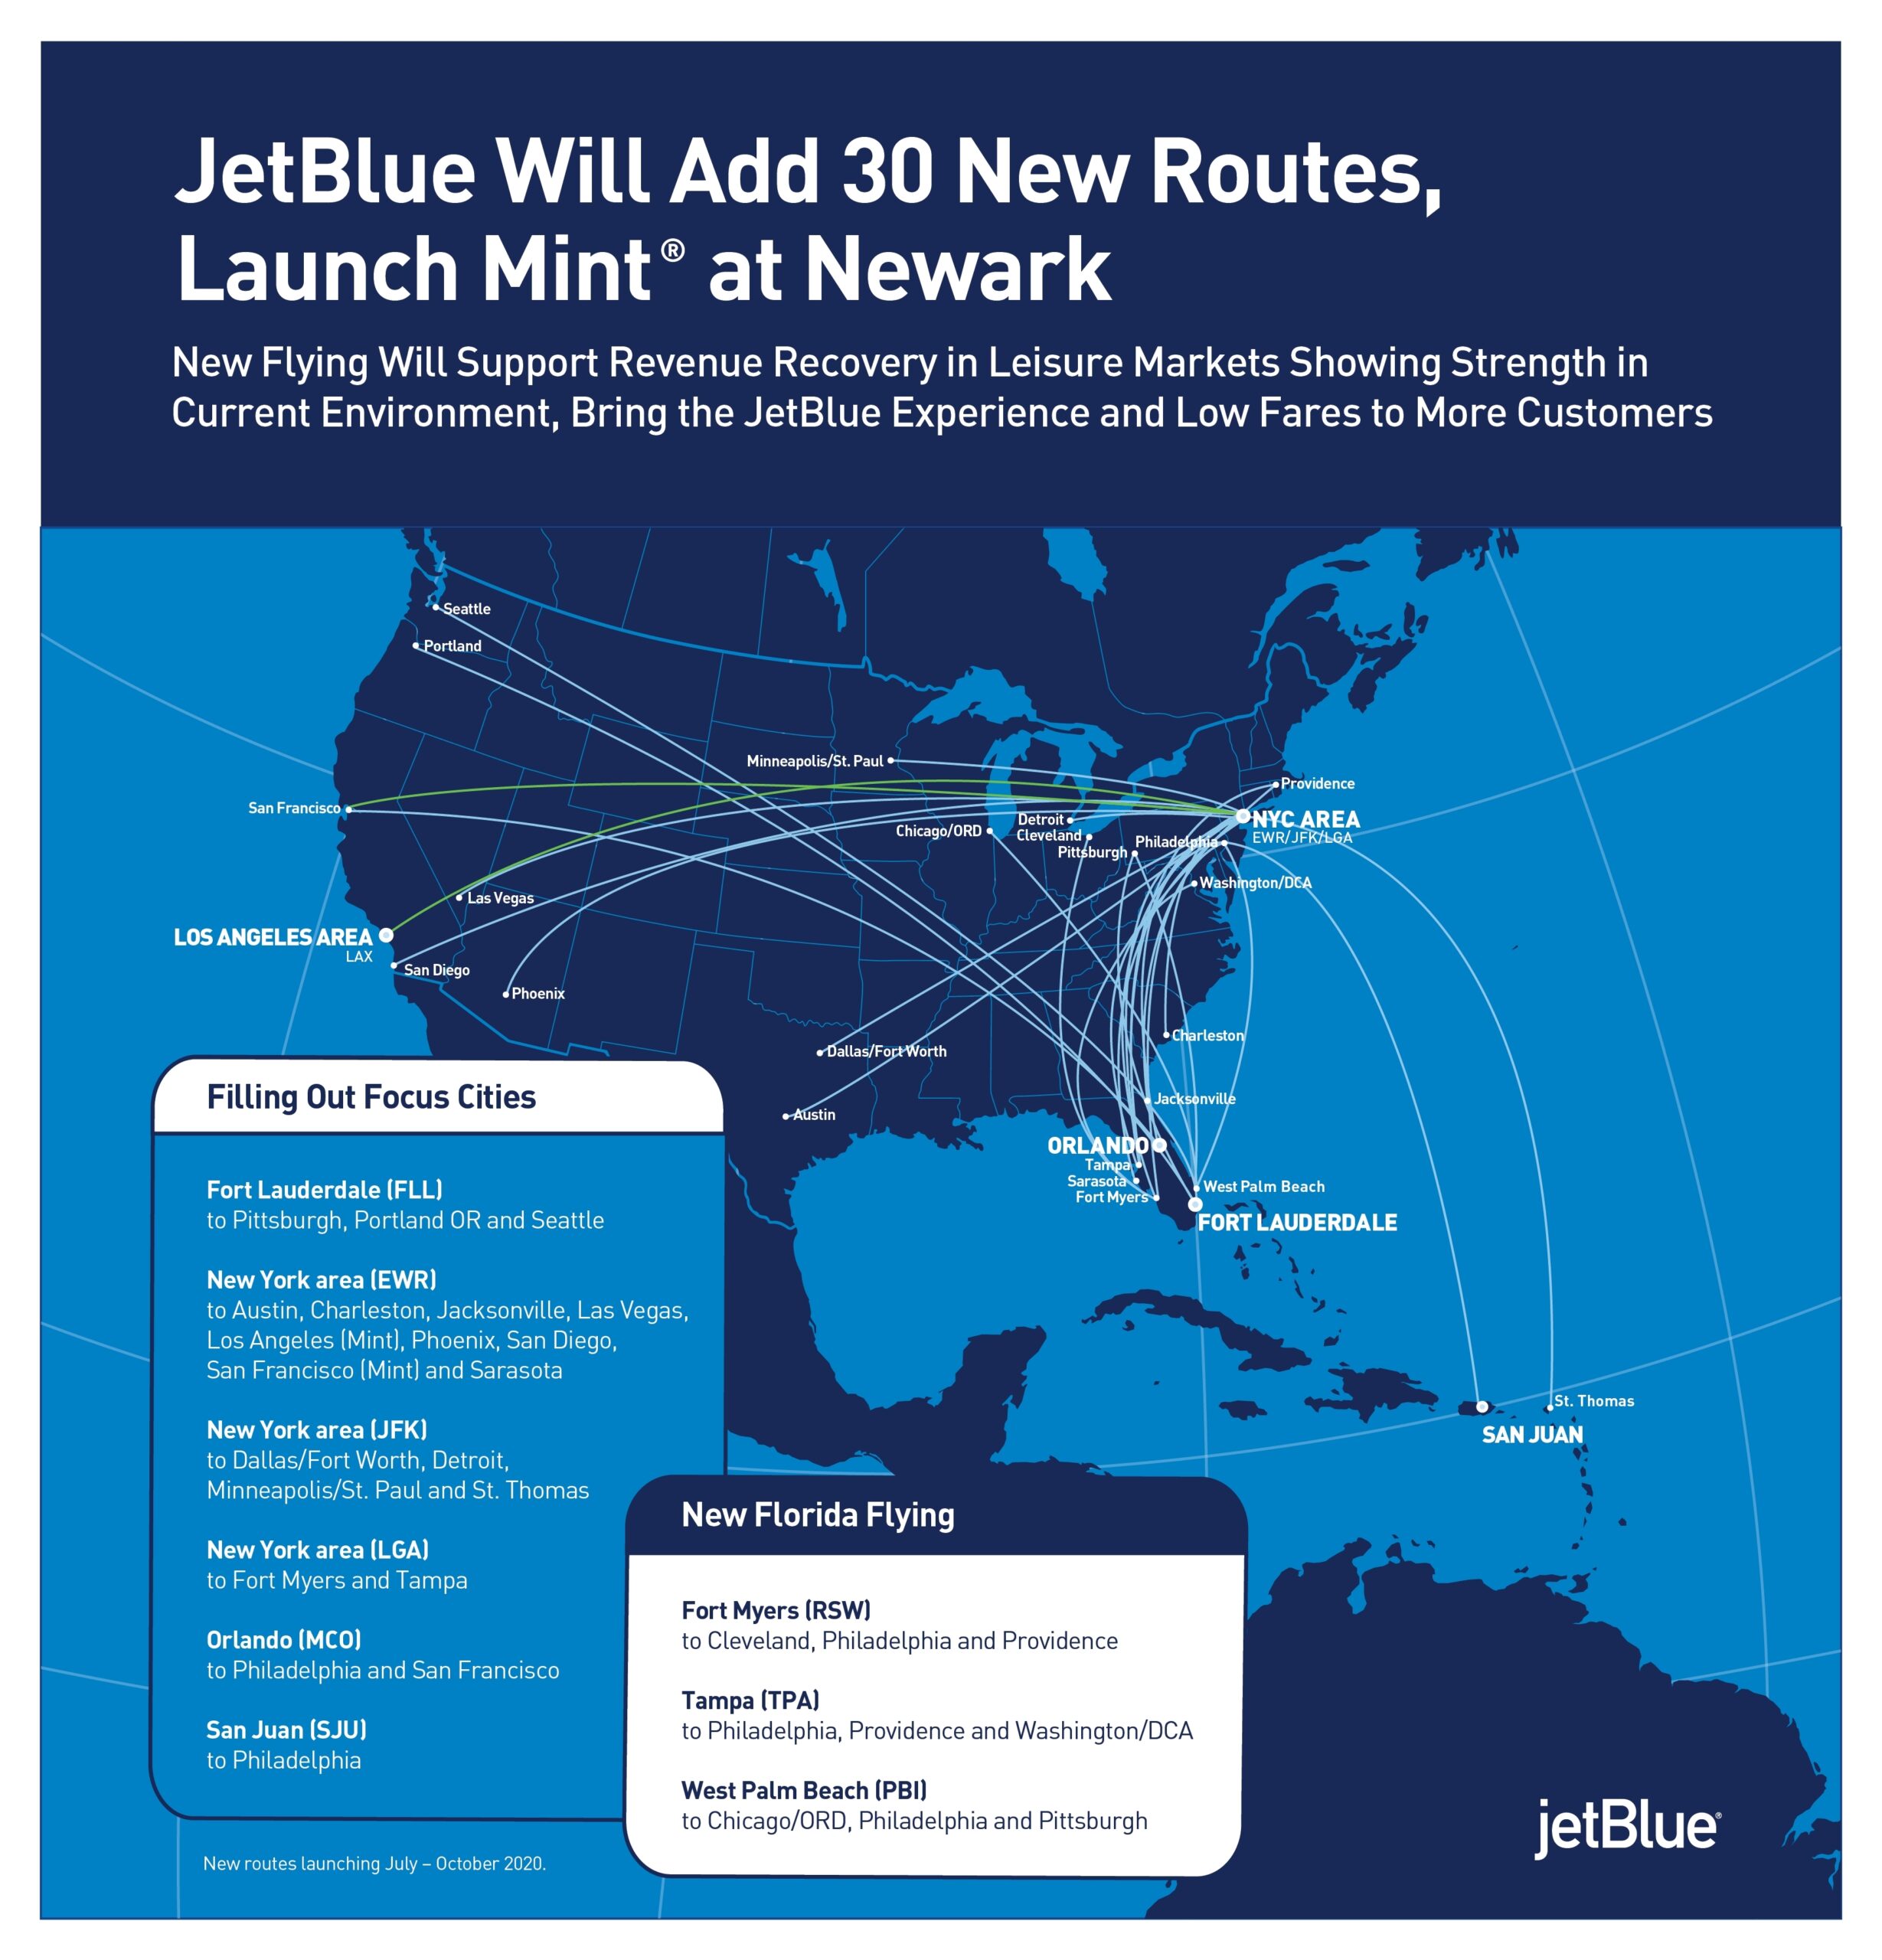 JetBlue Airways introduces Mint, its new trans-con service